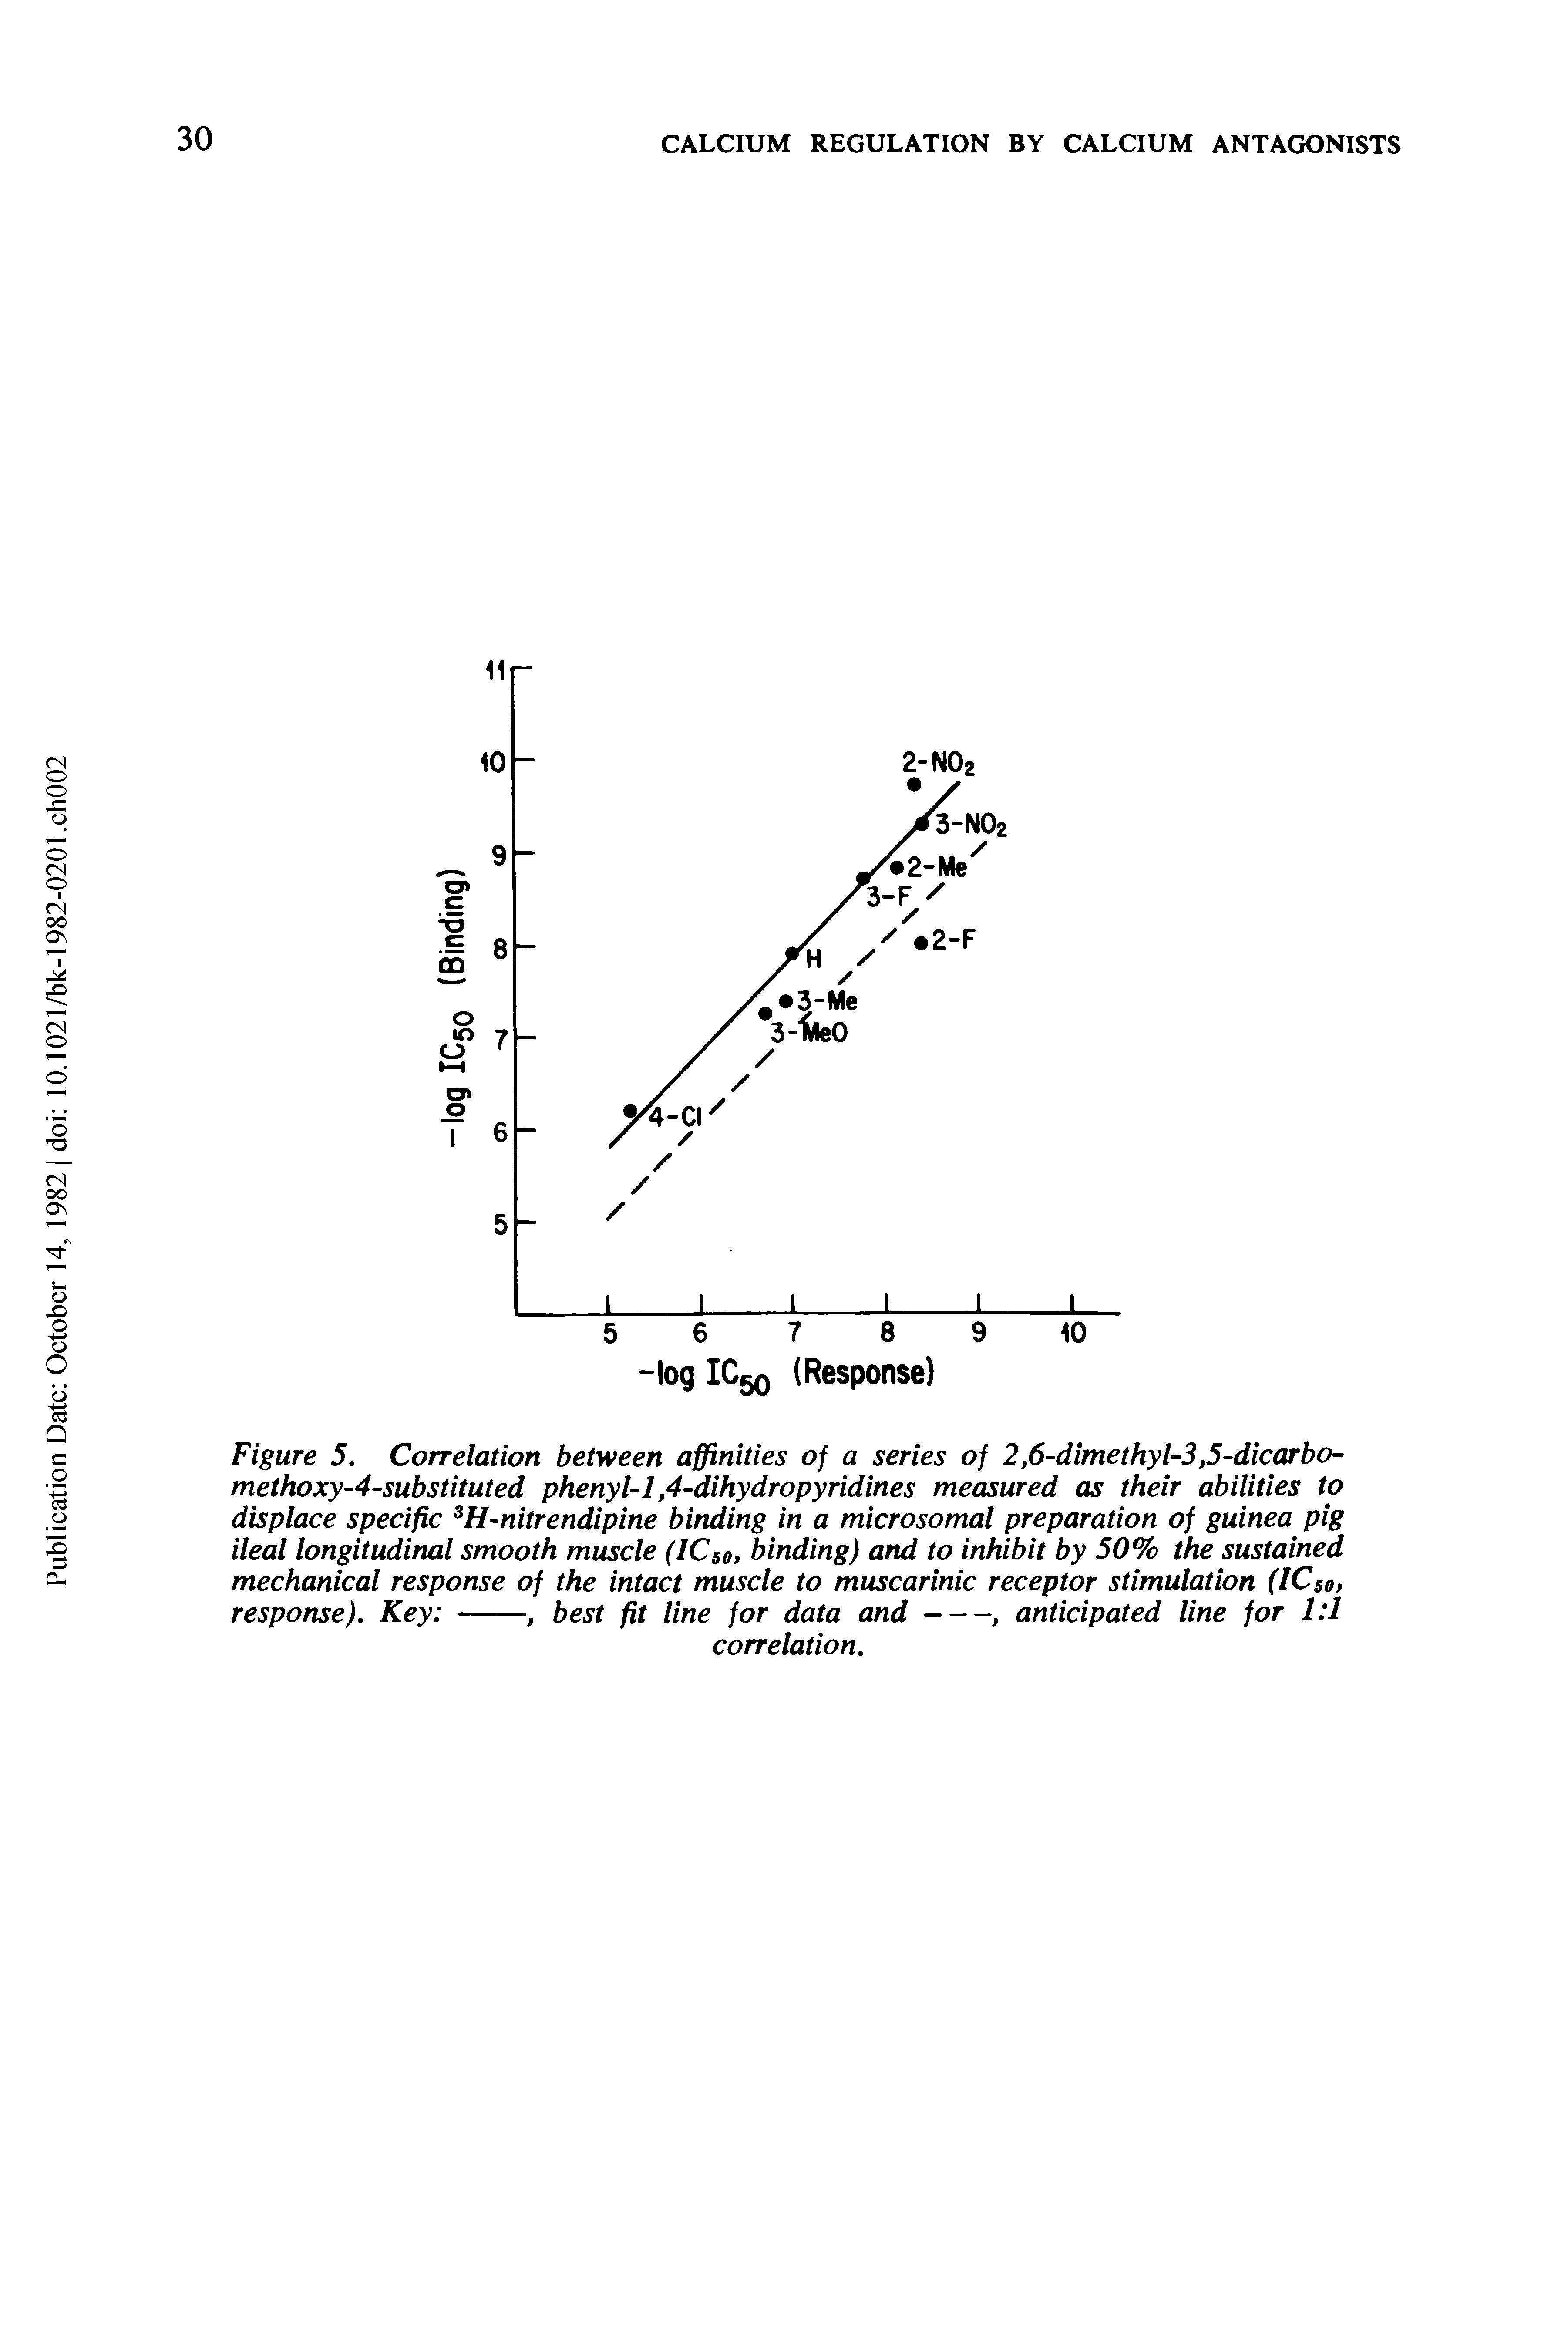 Figure 5. Correlation between affinities of a series of 2,6-dimethyl-3,5-dicarbo-methoxy-4-substituted phenyl-1,4-dihydropyridines measured as their abilities to displace specific 3H-nitrendipine binding in a microsomal preparation of guinea pig ileal longitudinal smooth muscle (IC50, binding) and to inhibit by 50% the sustained mechanical response of the intact muscle to muscarinic receptor stimulation (1Cso,...